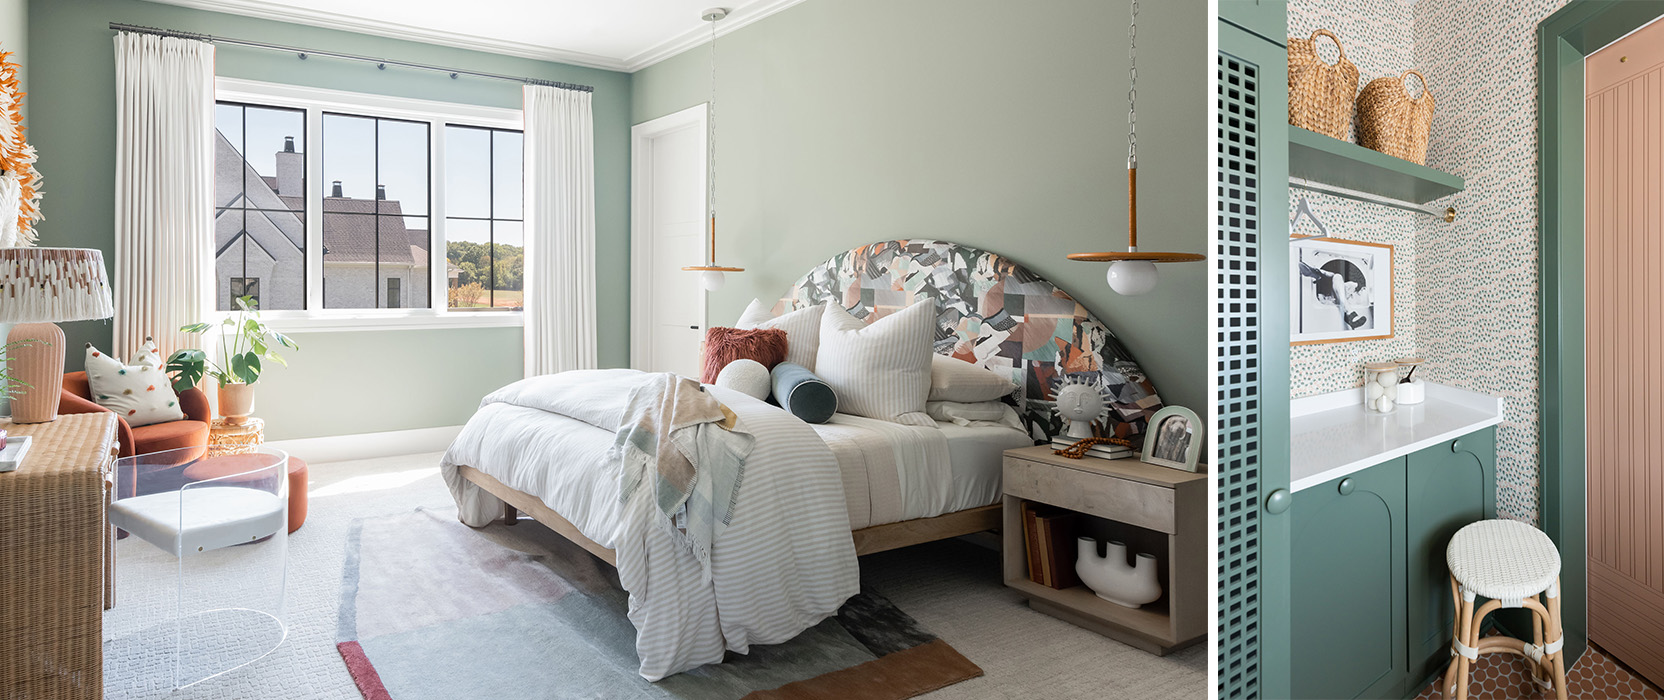 Left image: Soft green bedroom on a sunny day with lots of throw pillows and blankets on bed with oversized arch fabric-covered headboard, neutral accents and white curtains. Right image: Green built-ins and coordinating wallpapered walls in storage area with white countertop.